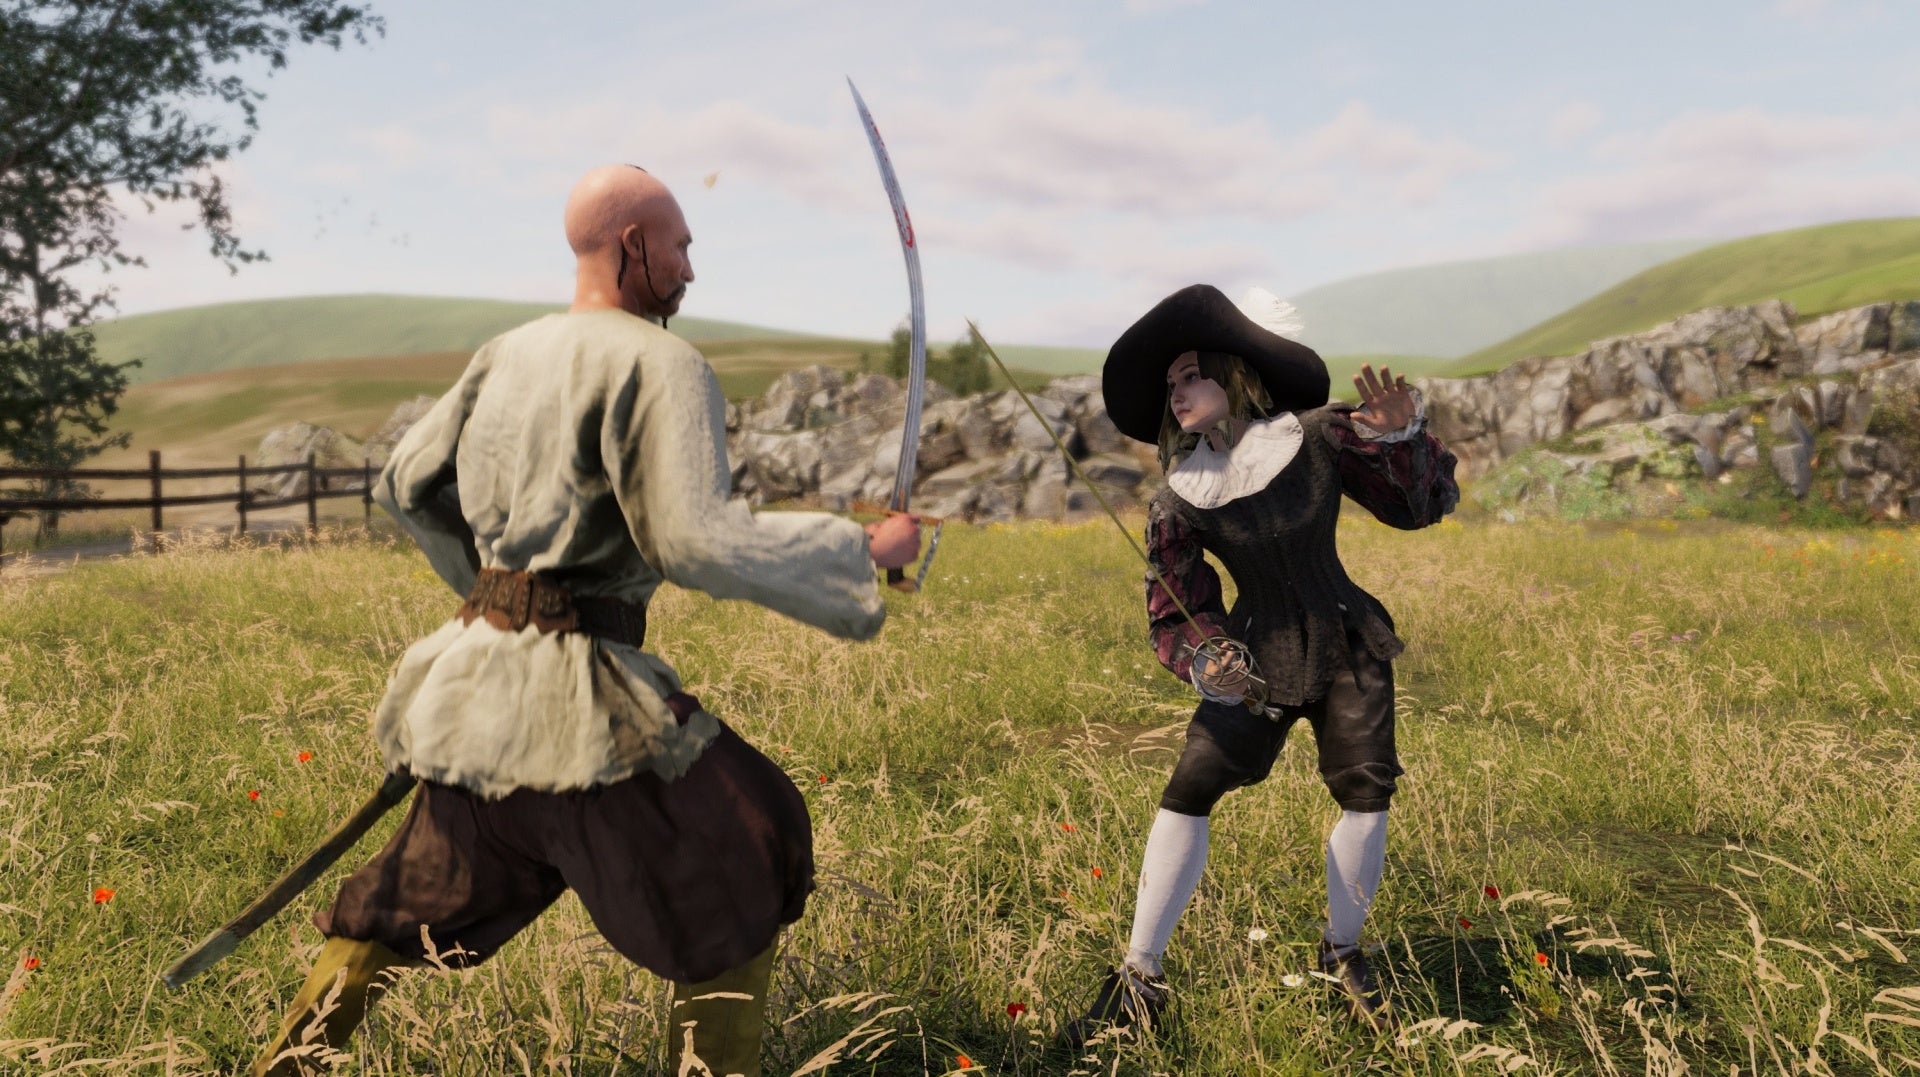 A screenshot showing two people fighting with swords in a field, one a bald man, one a woman, from the game Hellish Quart.